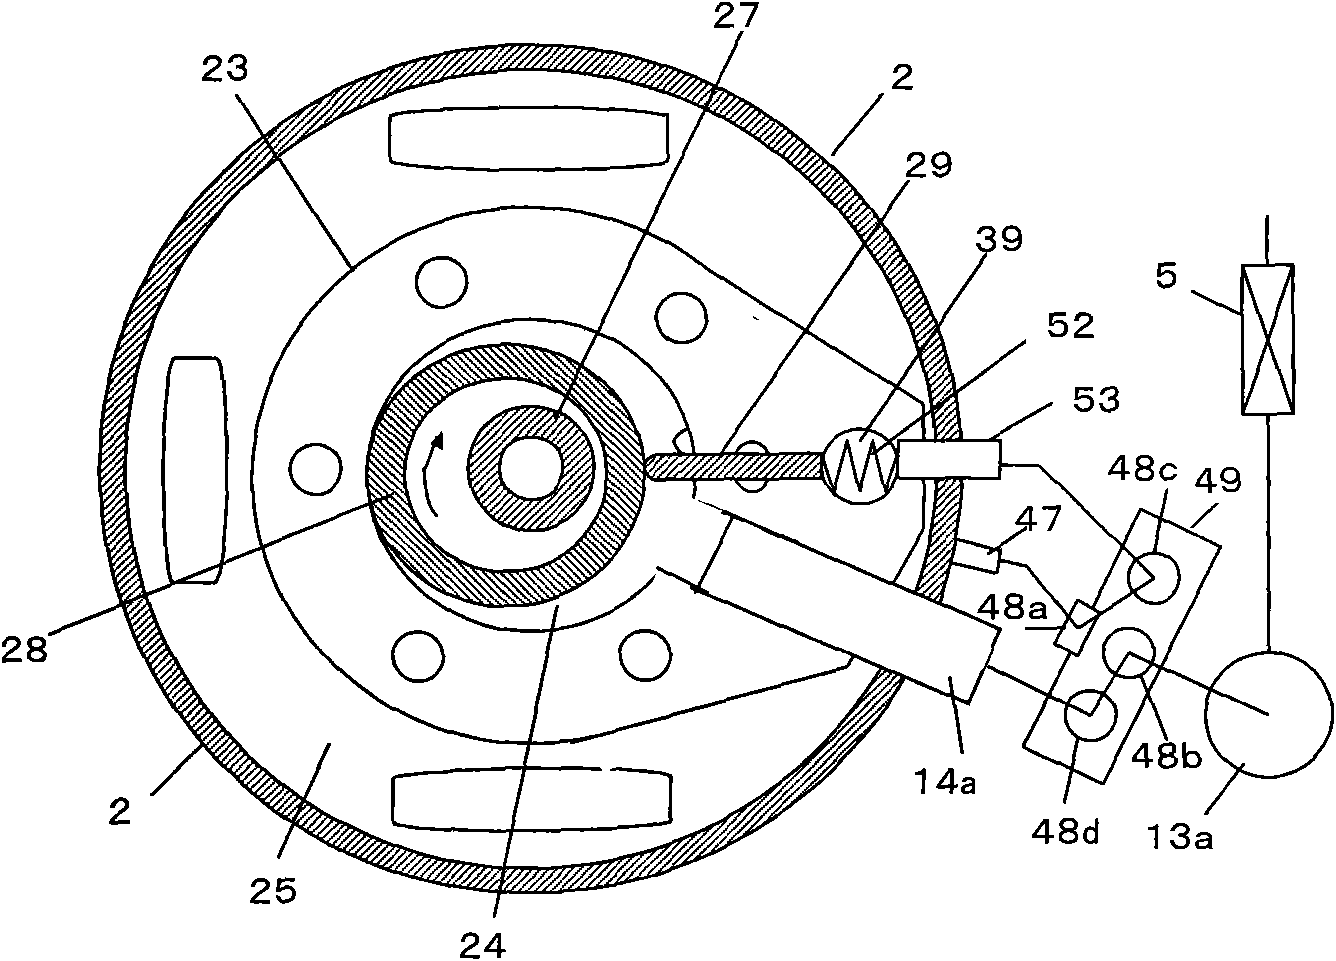 Refrigeration circulating system and application thereof